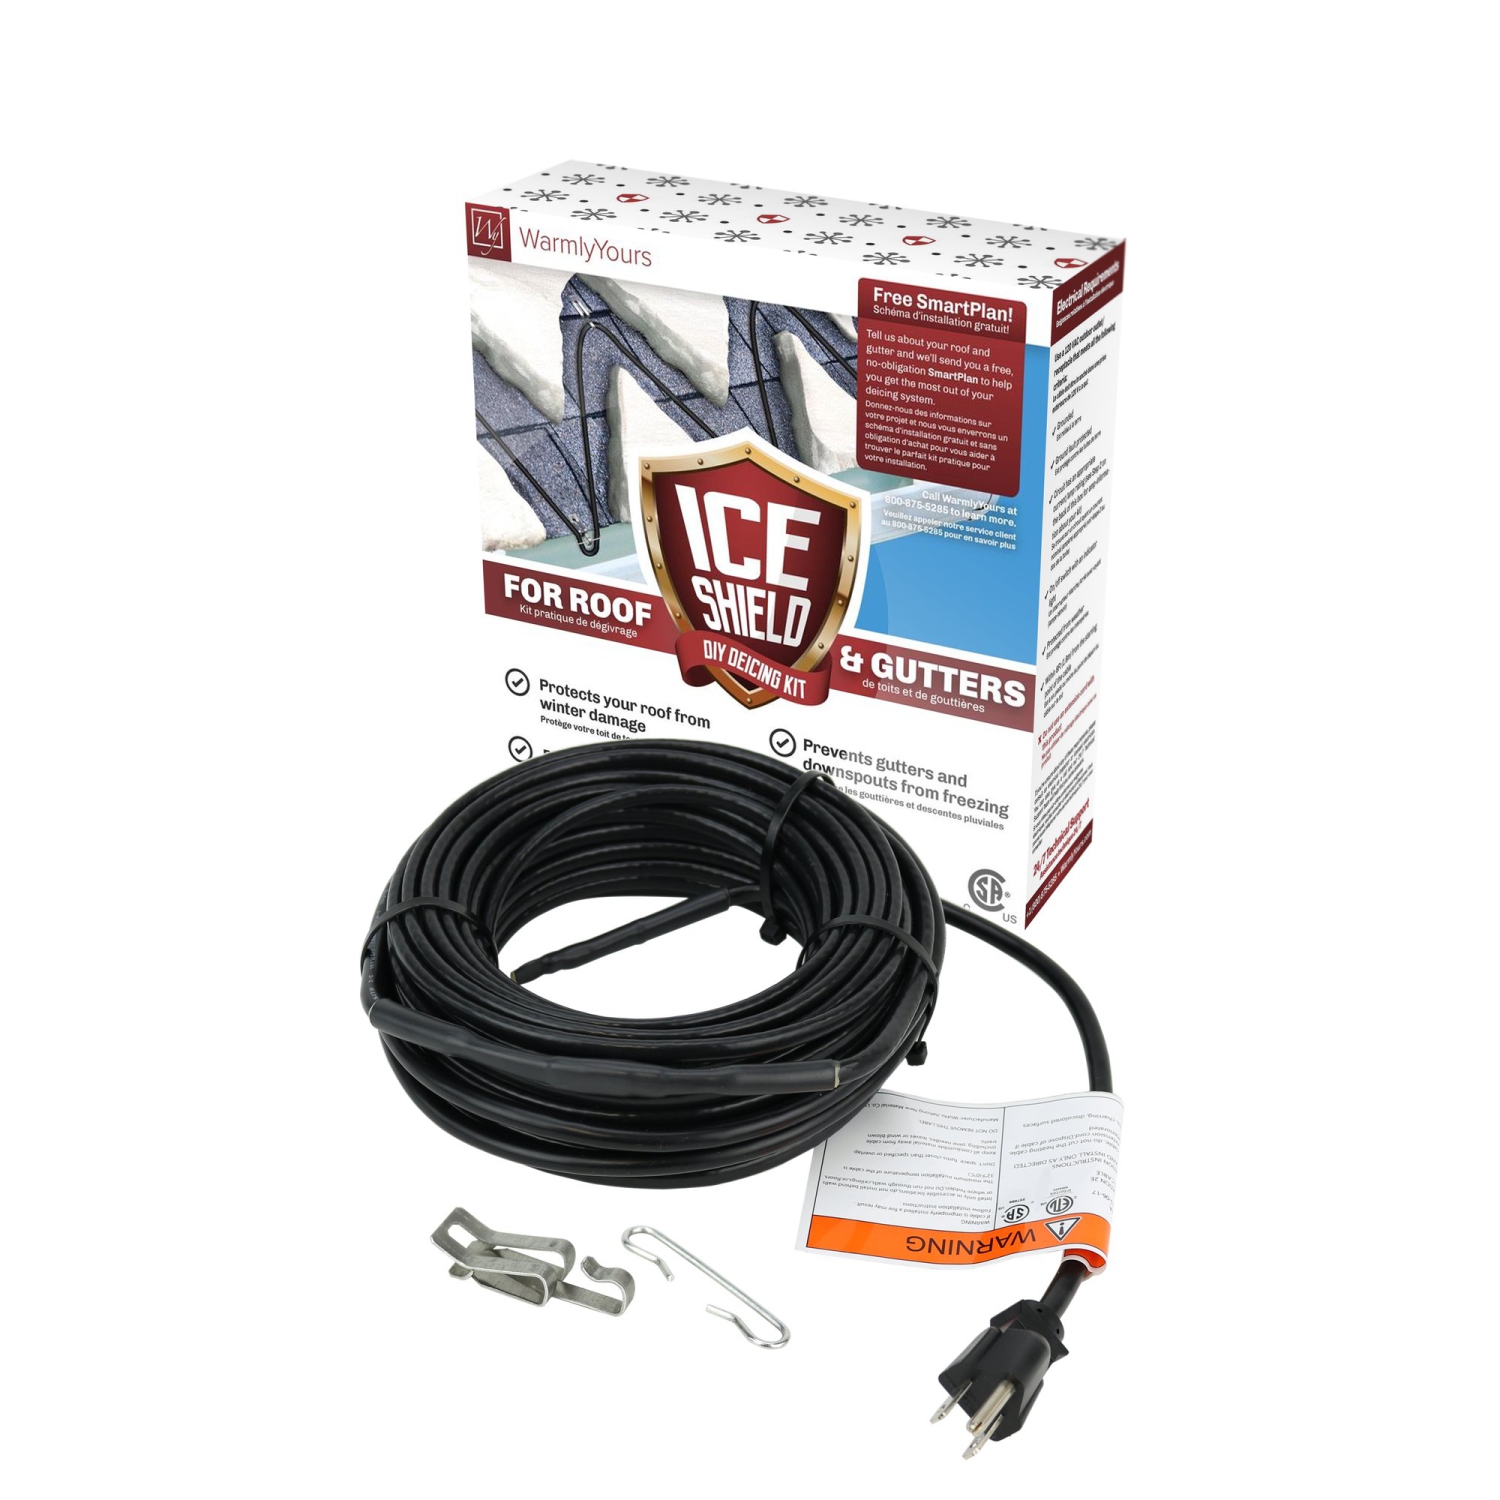 WarmlyYours Ice Shield Roof & Gutter De-icing Cable Kit,20 ft, Protect from Ice and Snow Damage